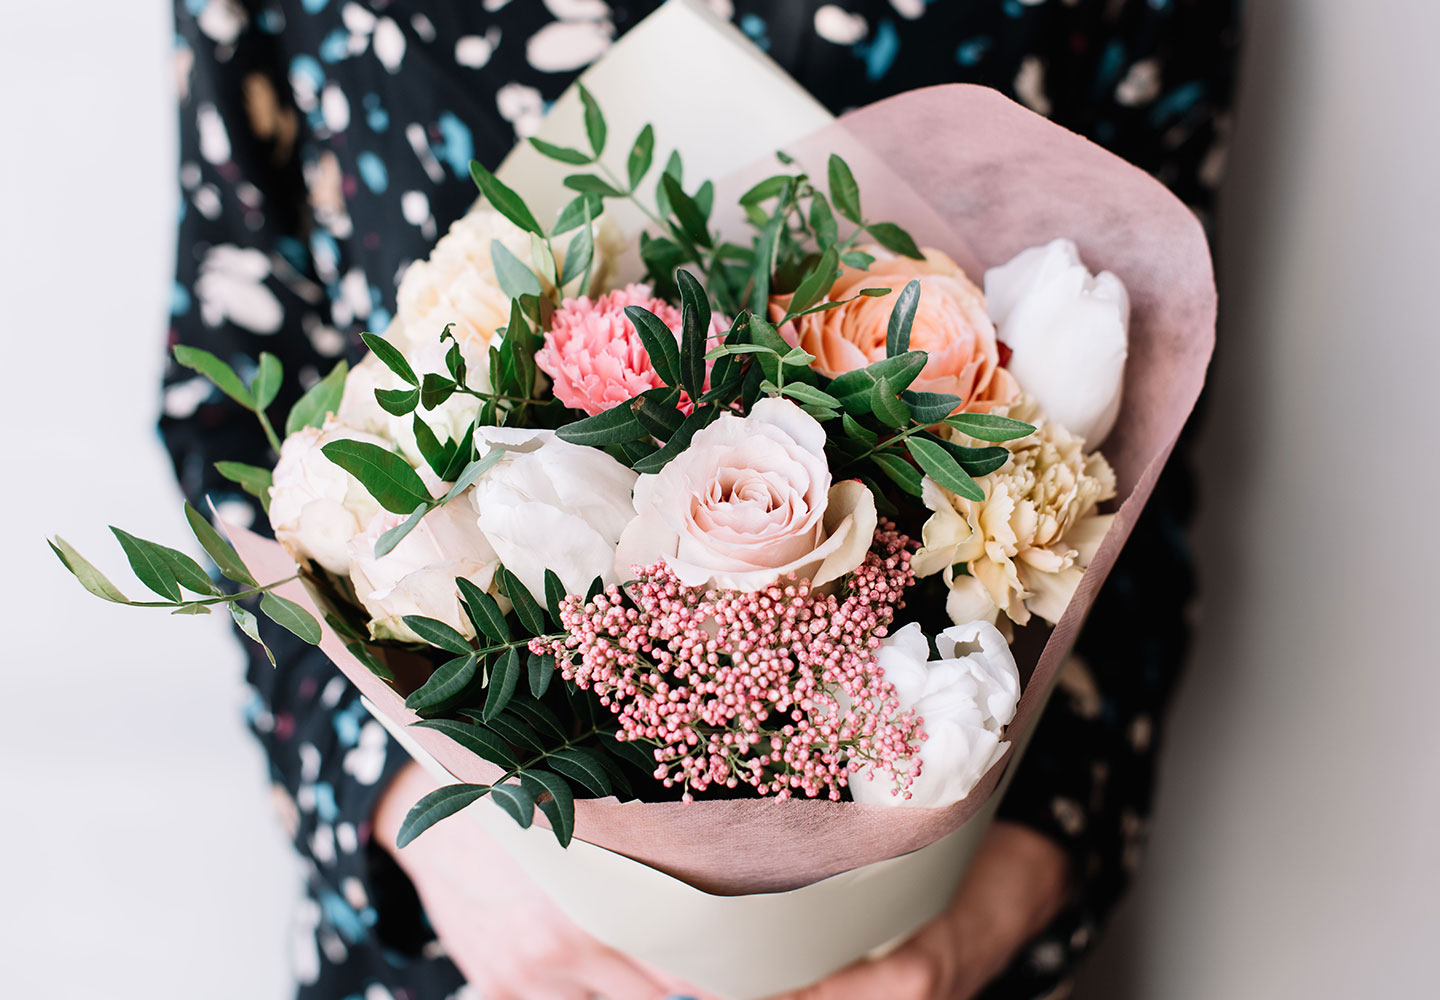 Flower Arrangements as Gifts: How to Choose the Perfect Bouquet